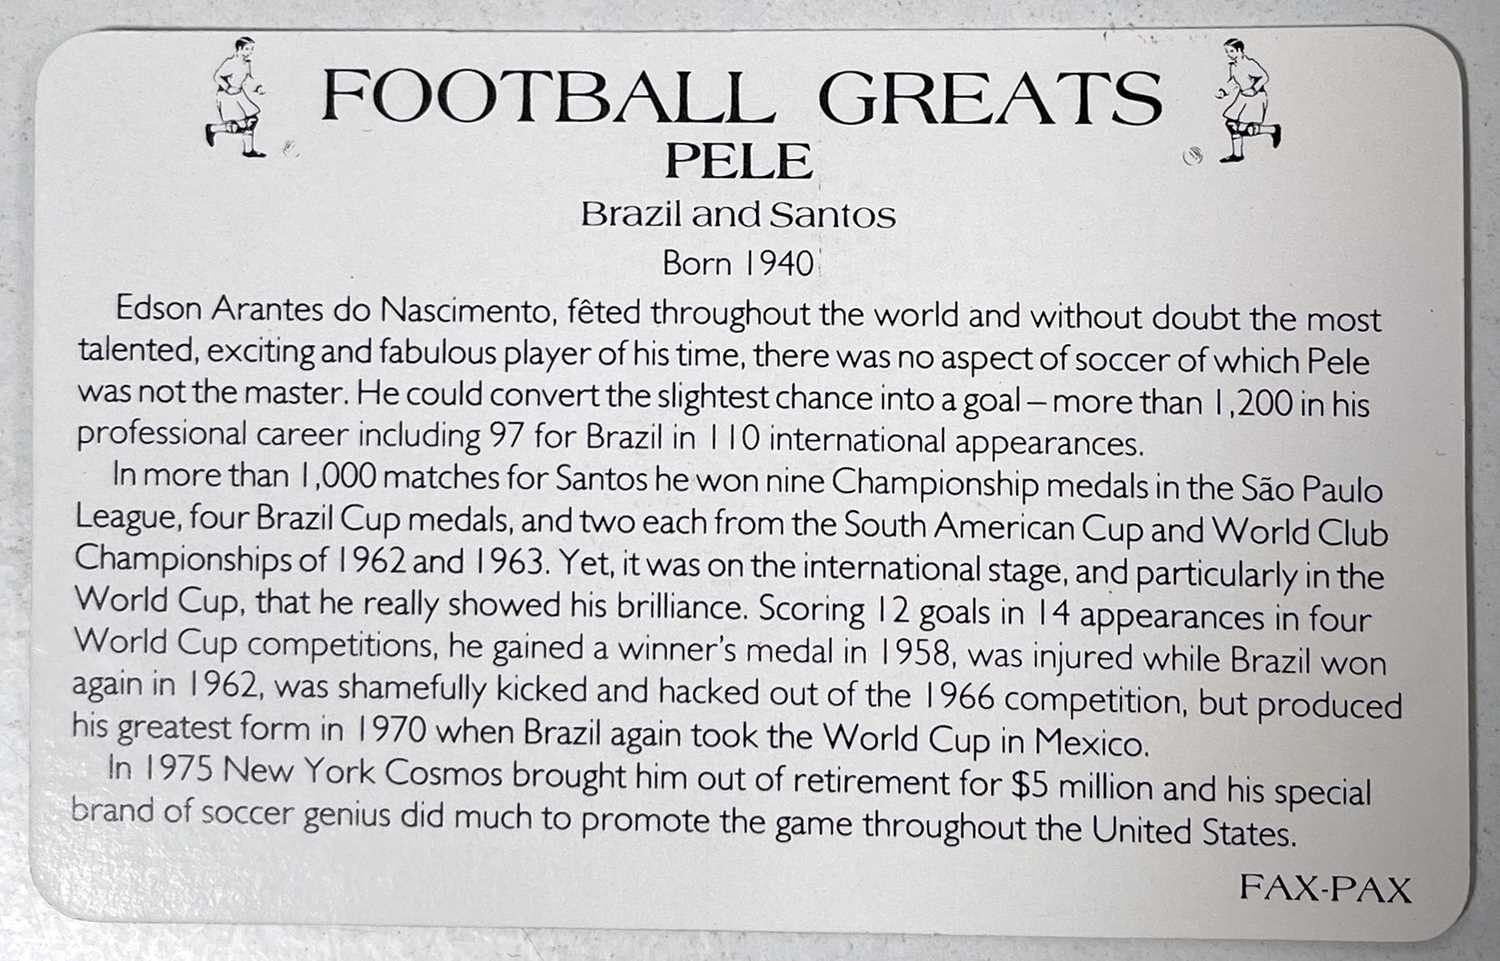 PELE SIGNED FAX-PAX CARD 1989 FOOTBALL GREATS. - Image 2 of 2